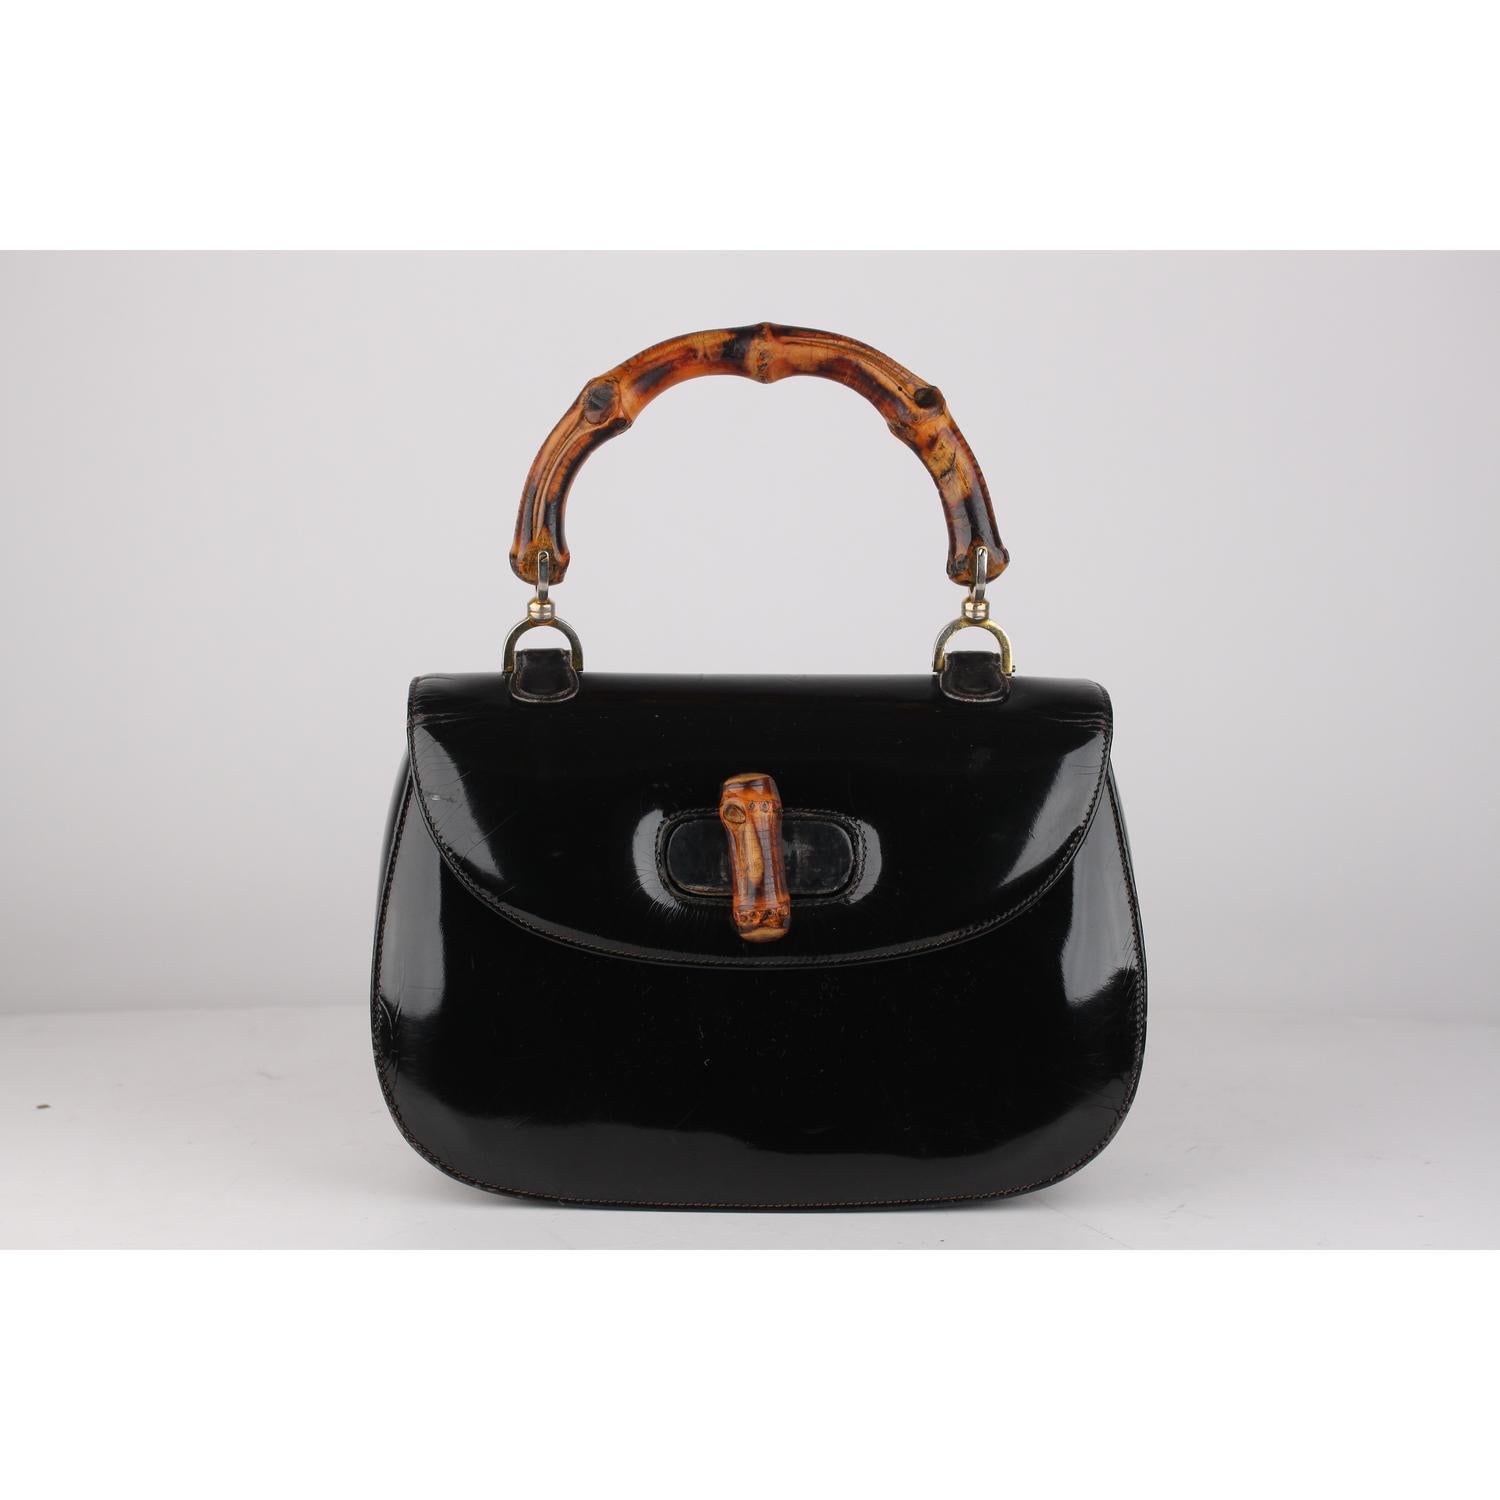 Gucci Vintage Black Patent Leather Bamboo Top Handle Bag

Material: Patent Leather 
Color: Black
Model: Bamboo Bag
Gender: Women
Country of Manufacture: Italy
Size: Small Bags
Bag Depth: 3.5 inches - 8,9 cm 
Bag Height: 7 inches - 17,8 cm 
Bag